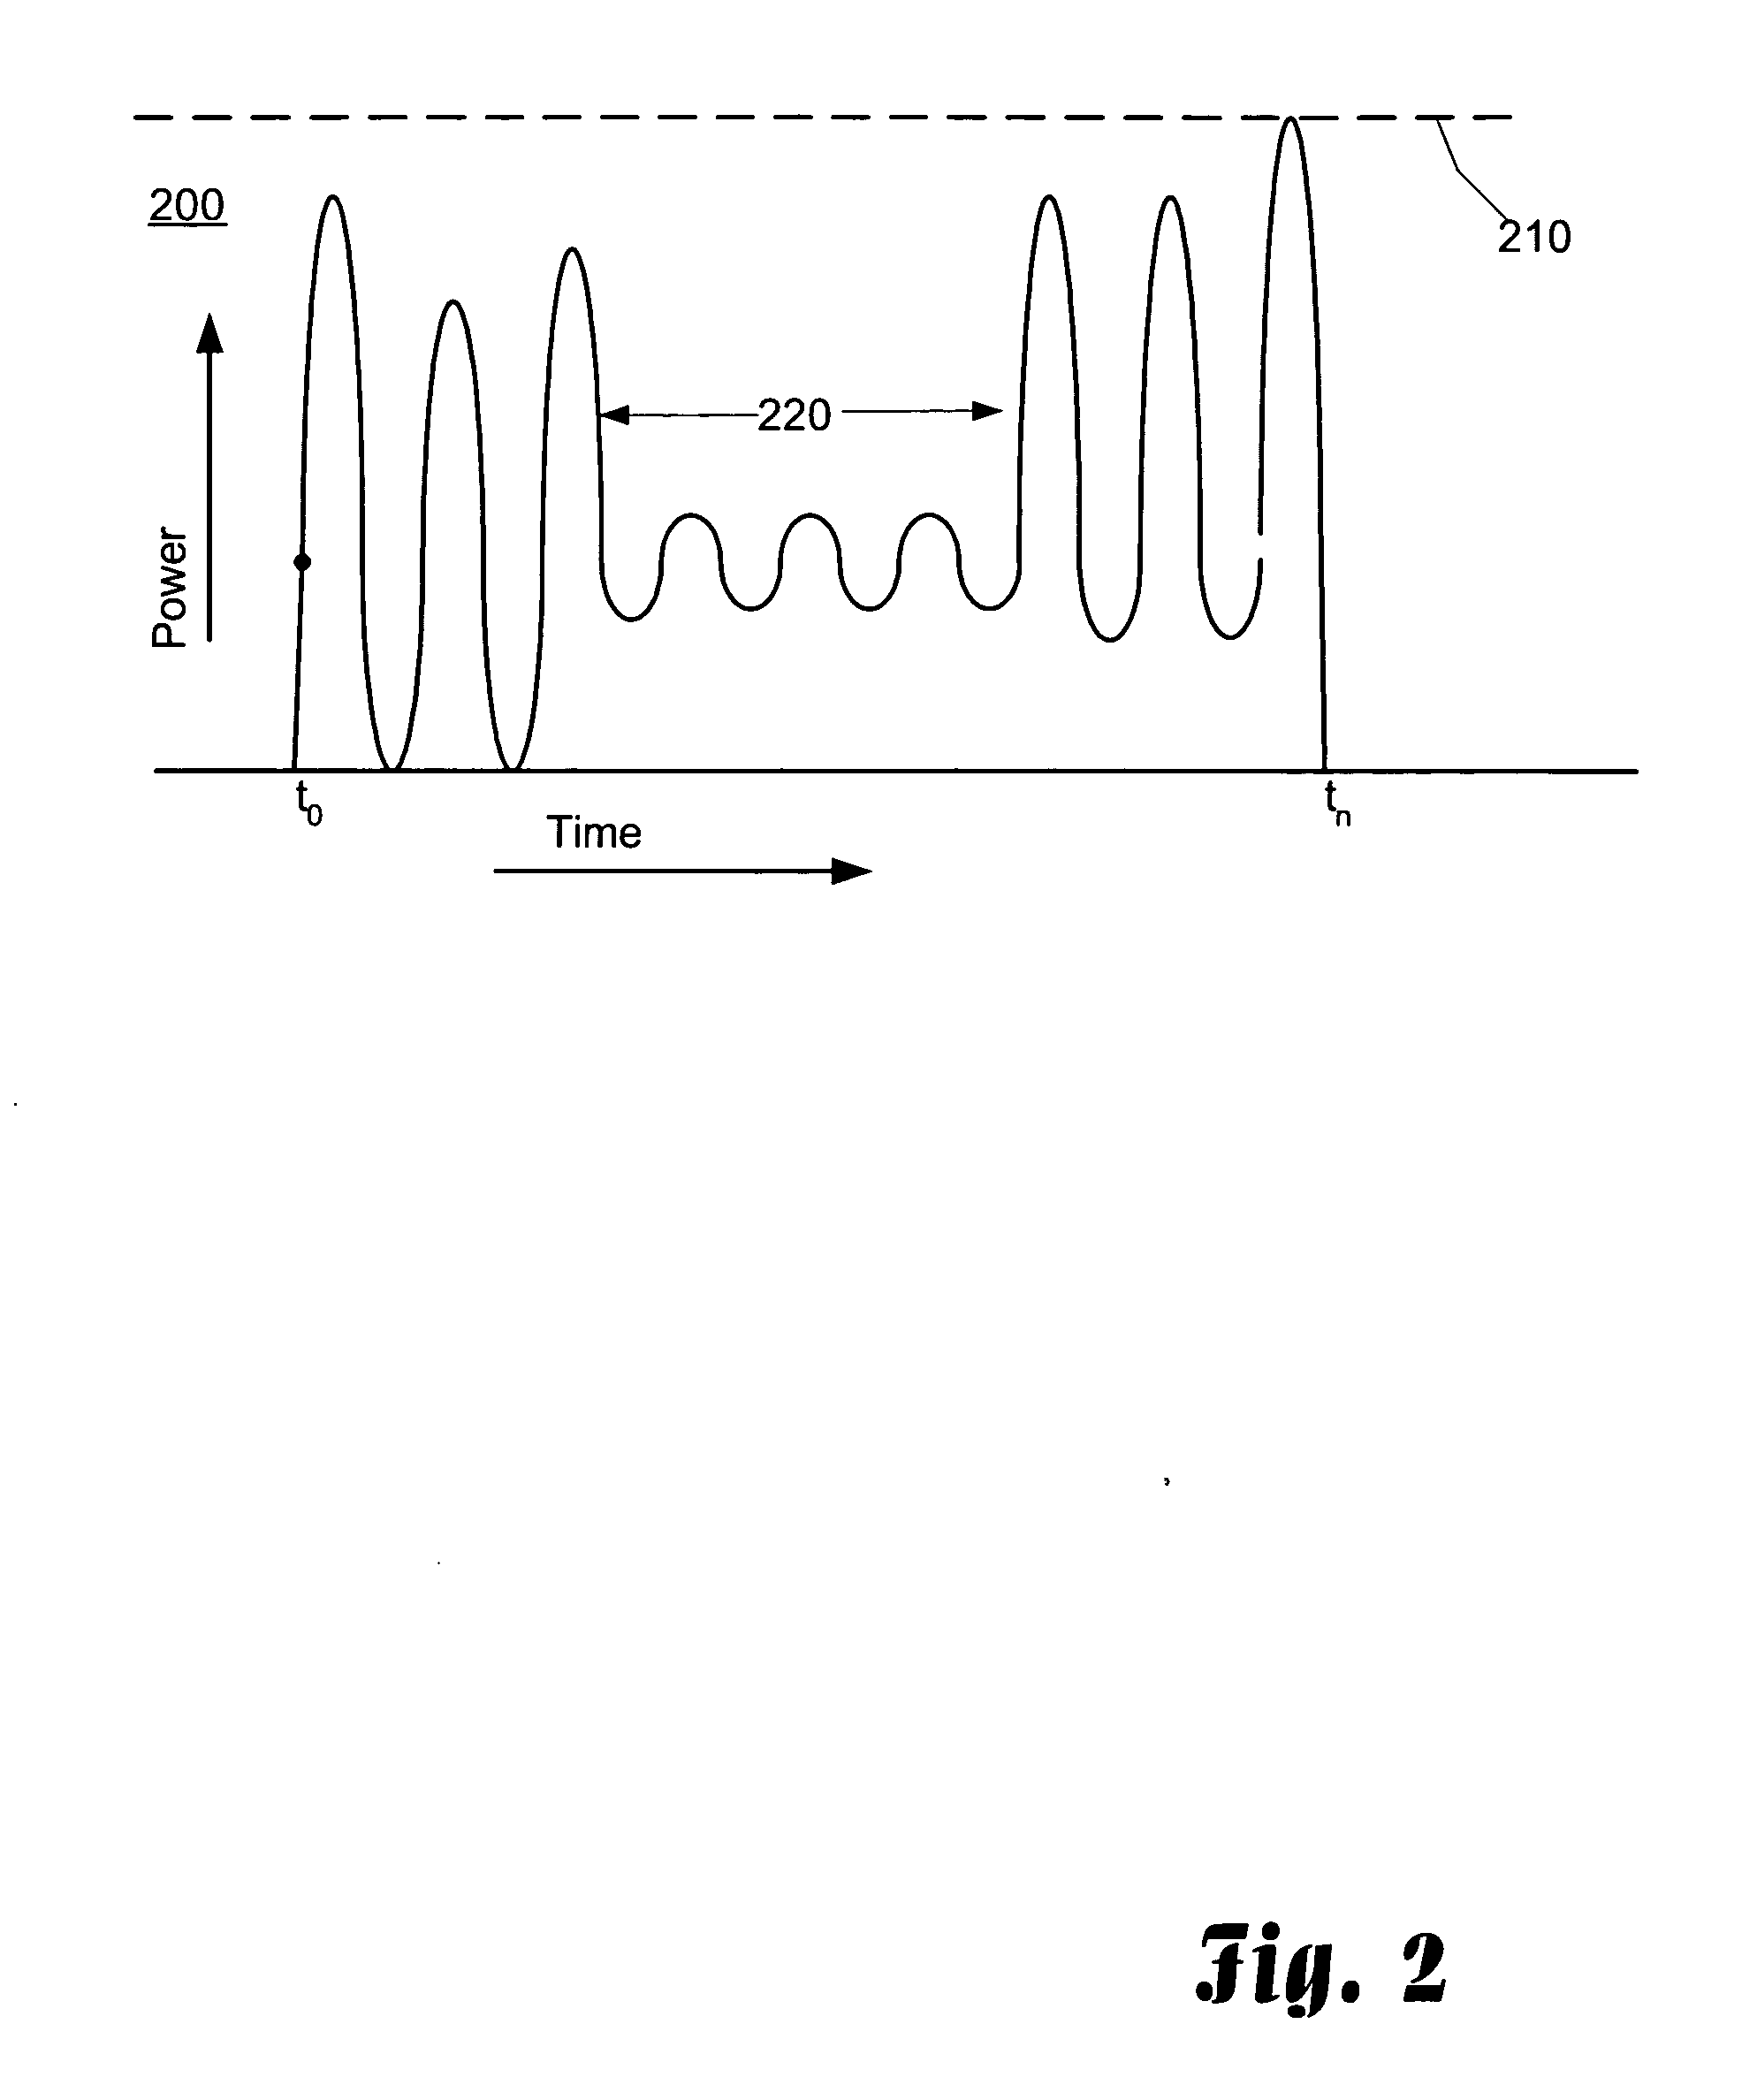 Detecting and maintaining linearity in a power amplifier system through comparing peak and RMS power levels